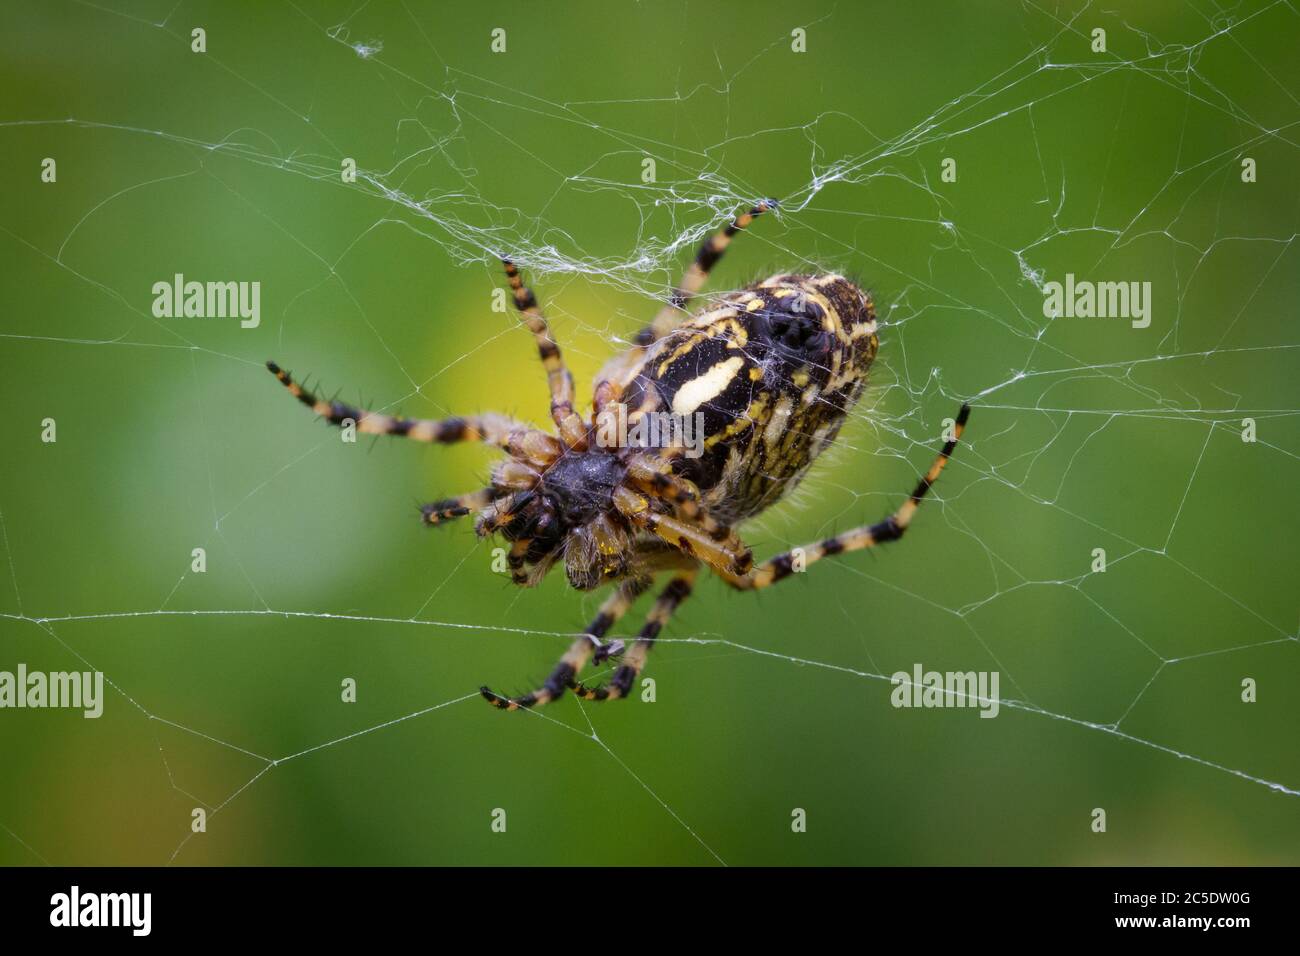 Macro photograph of a spider in the meadow Stock Photo